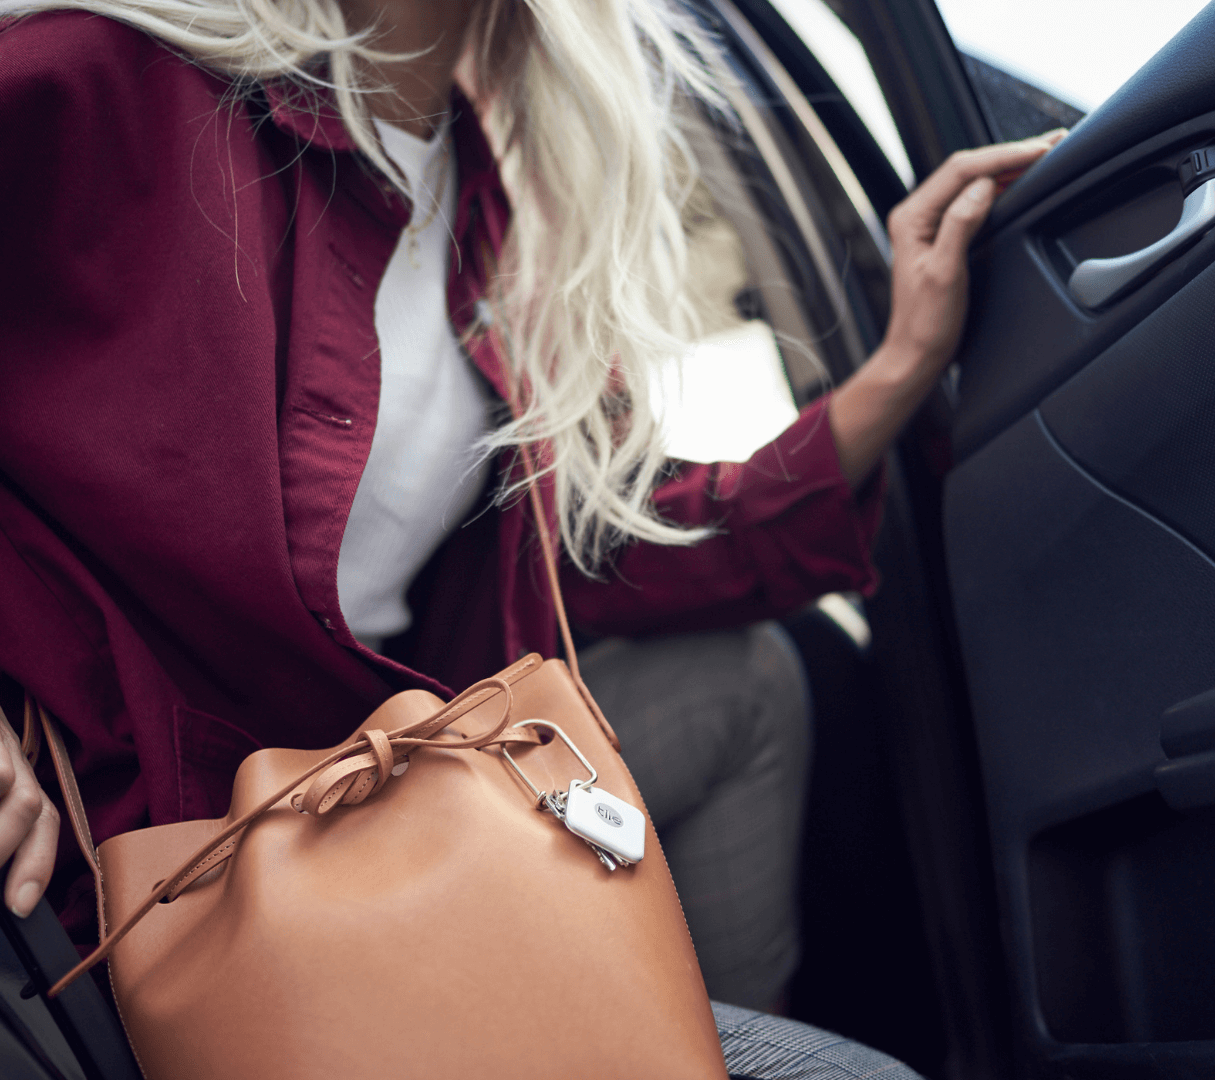 Purse Tracking Device: Find Your Purse | Tile Purse Tracker